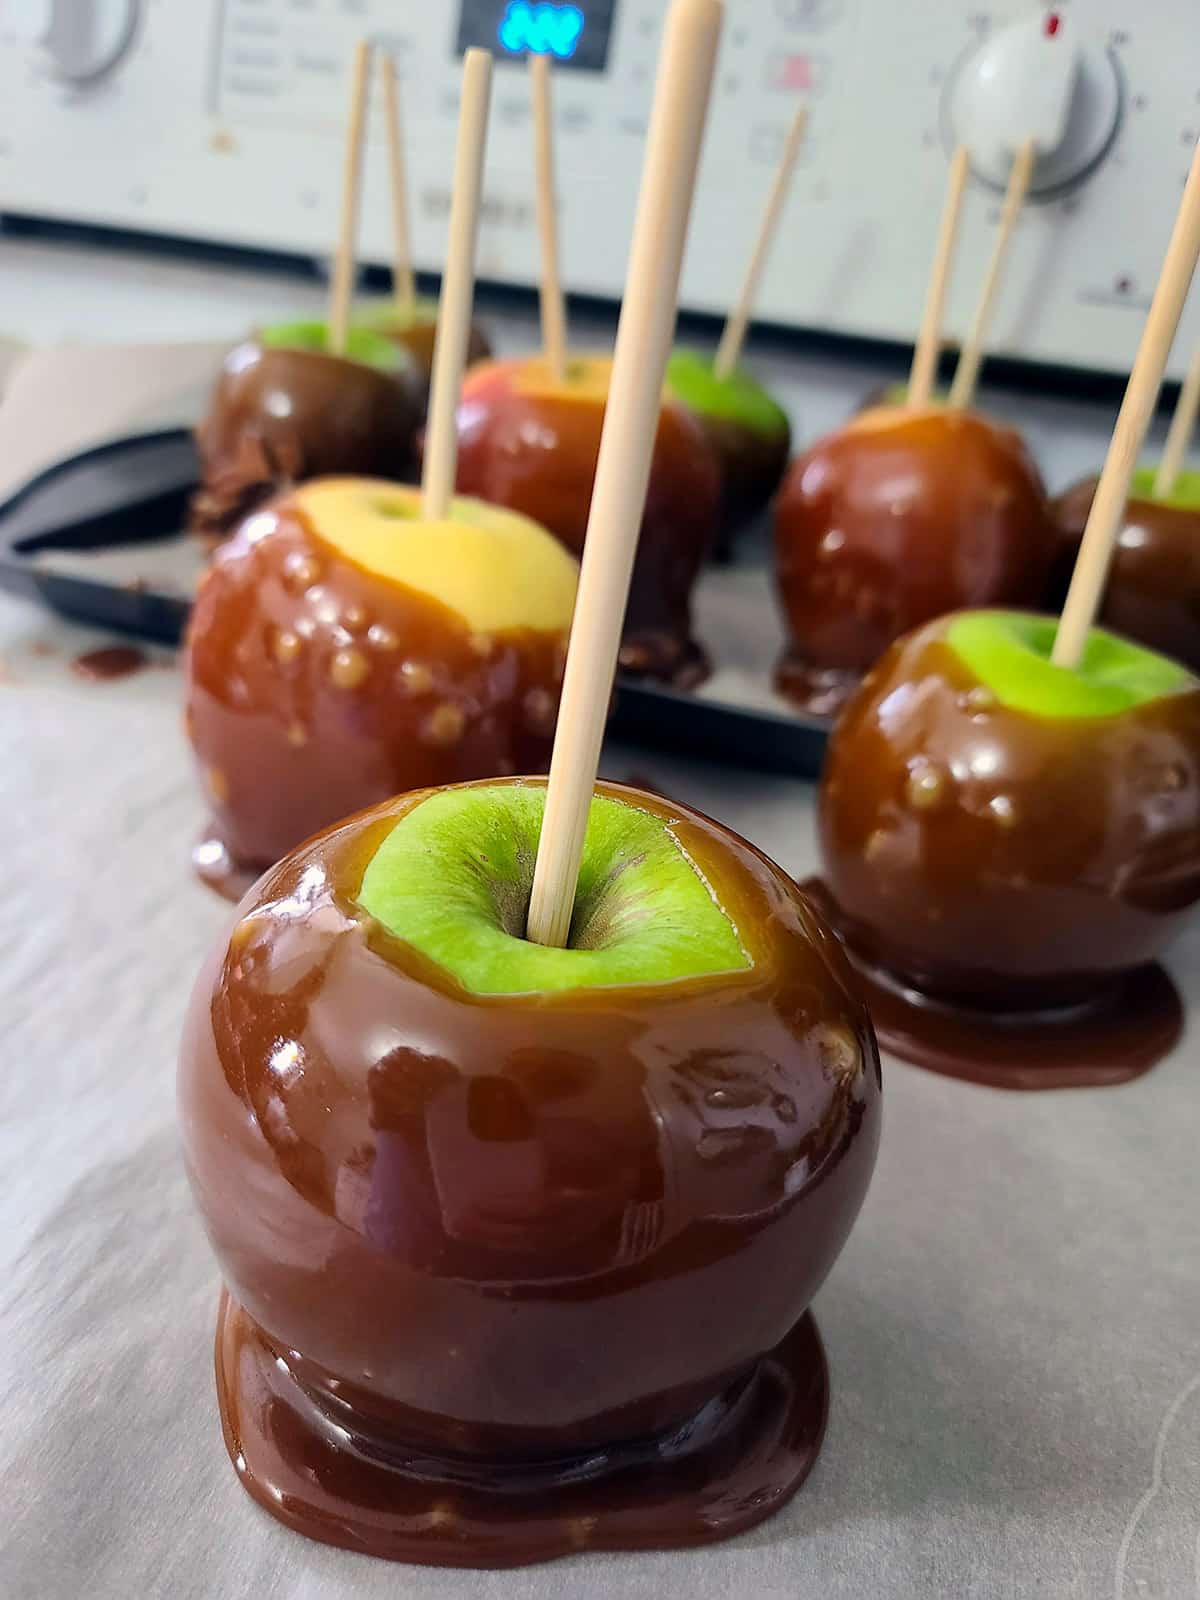 Several maple syrup caramel apples on parchment paper.